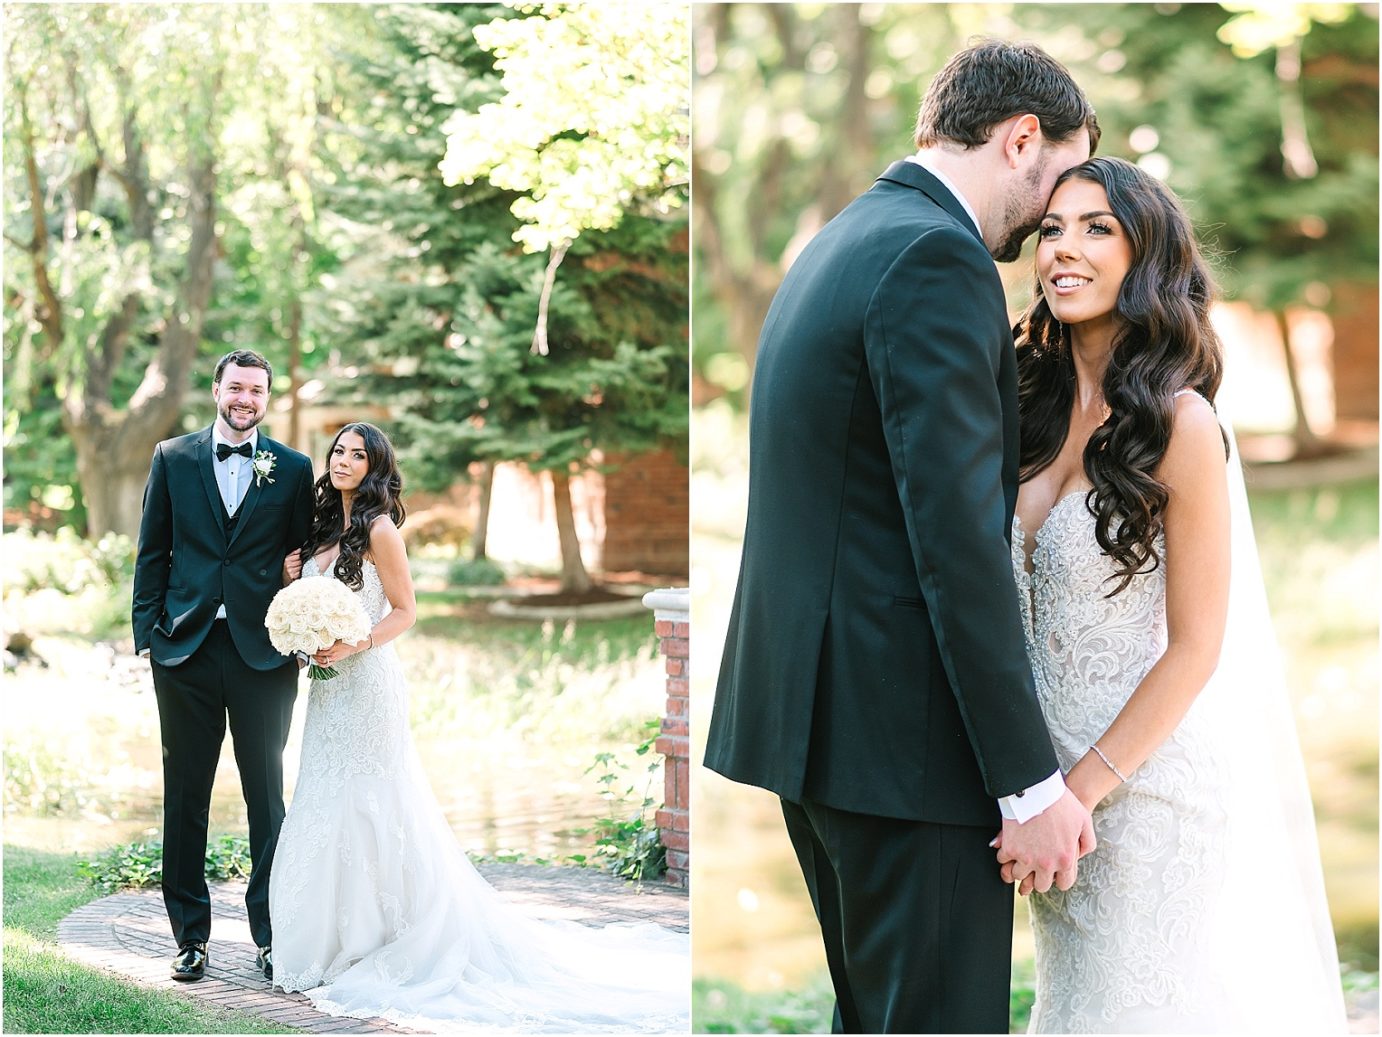 Disney-inspired Oakshire Estate Wedding bride and groom portraits by a pond